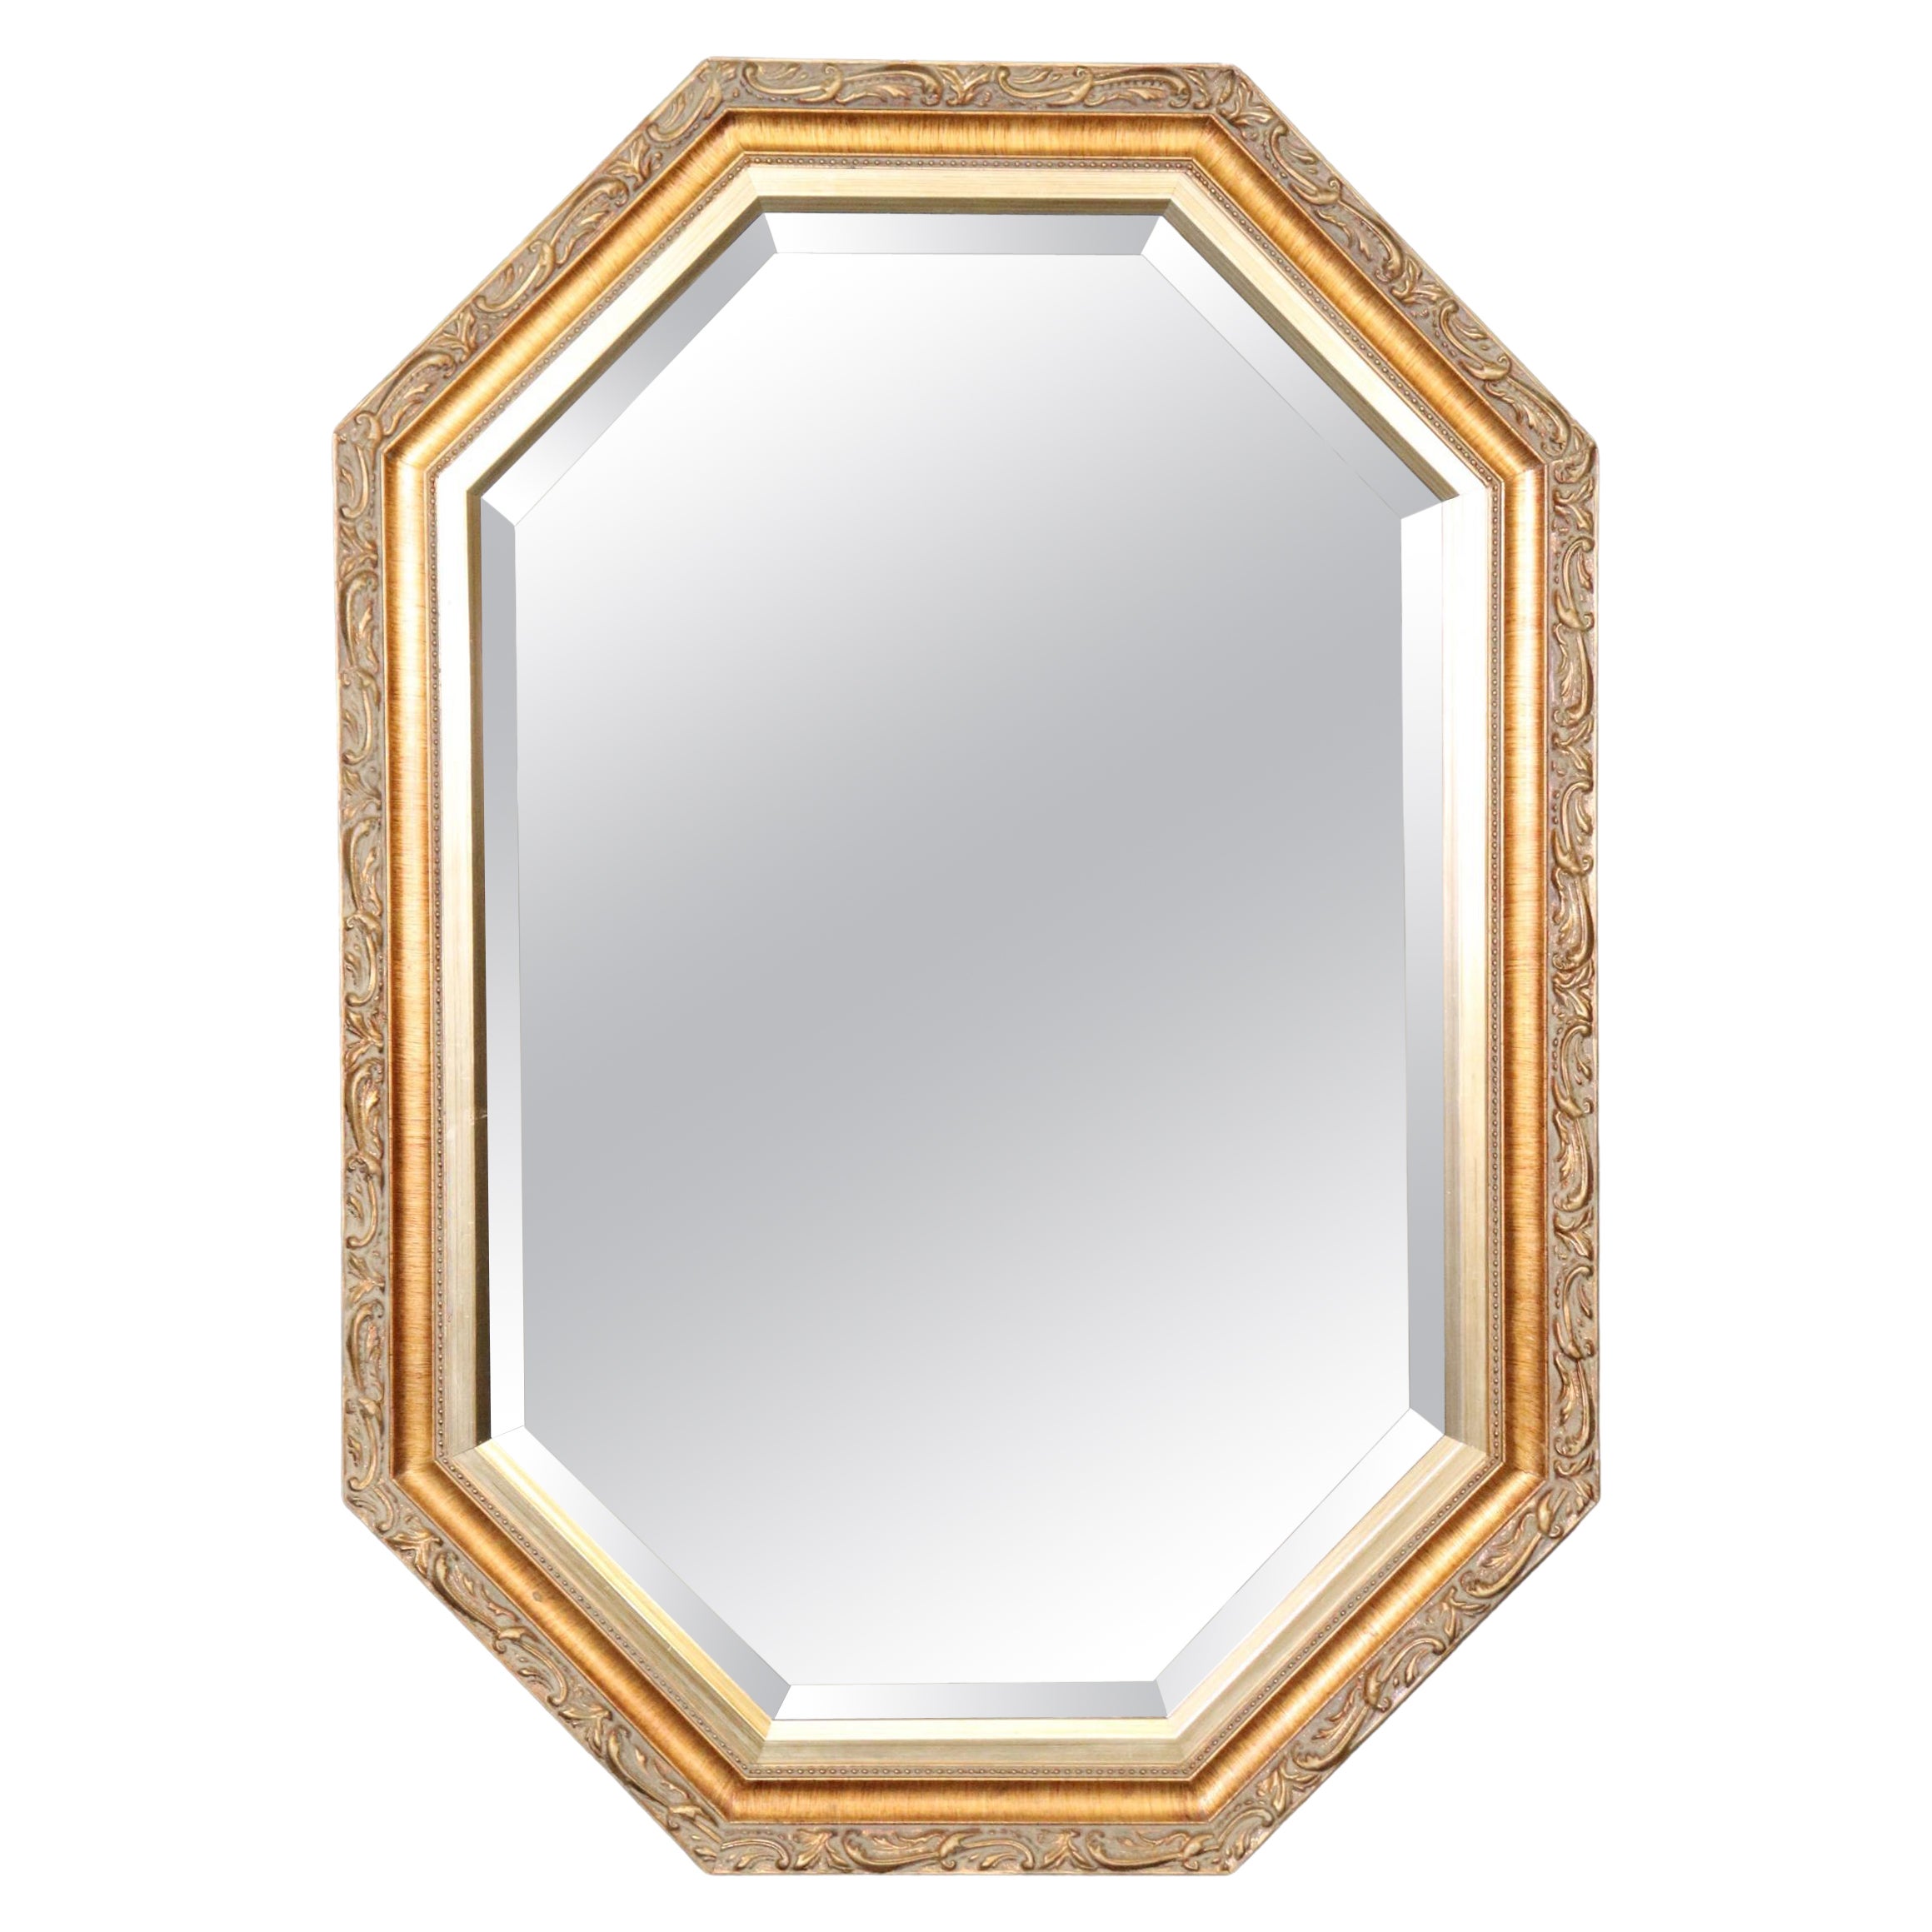 French Louis XVI Style Gold Gilt Octagonal Beveled Glass Wall Hanging Mirror